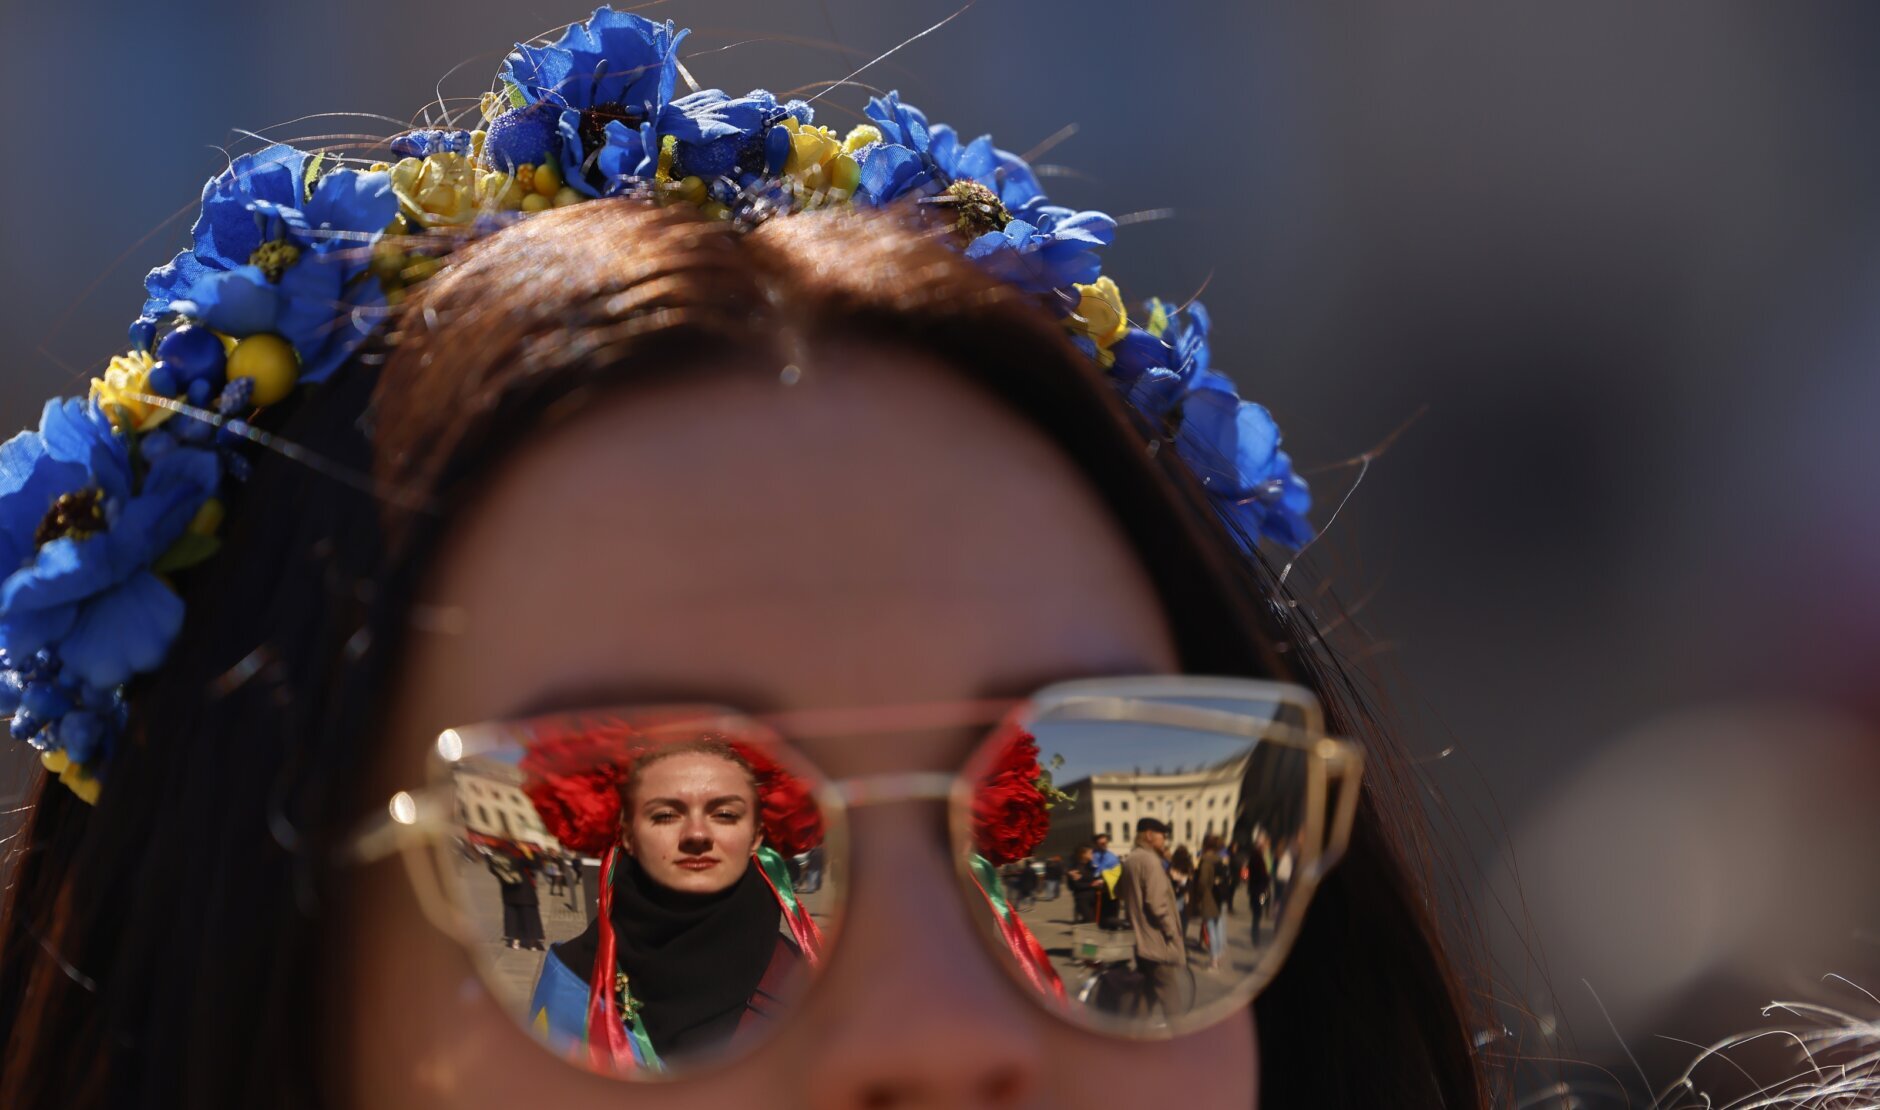 People attend a pro-Ukrainian protest under the slogan "March for true Peace in Ukraine", in Berlin, Germany, Saturday, April 16, 2022. (AP Photo/Hannibal Hanschke)